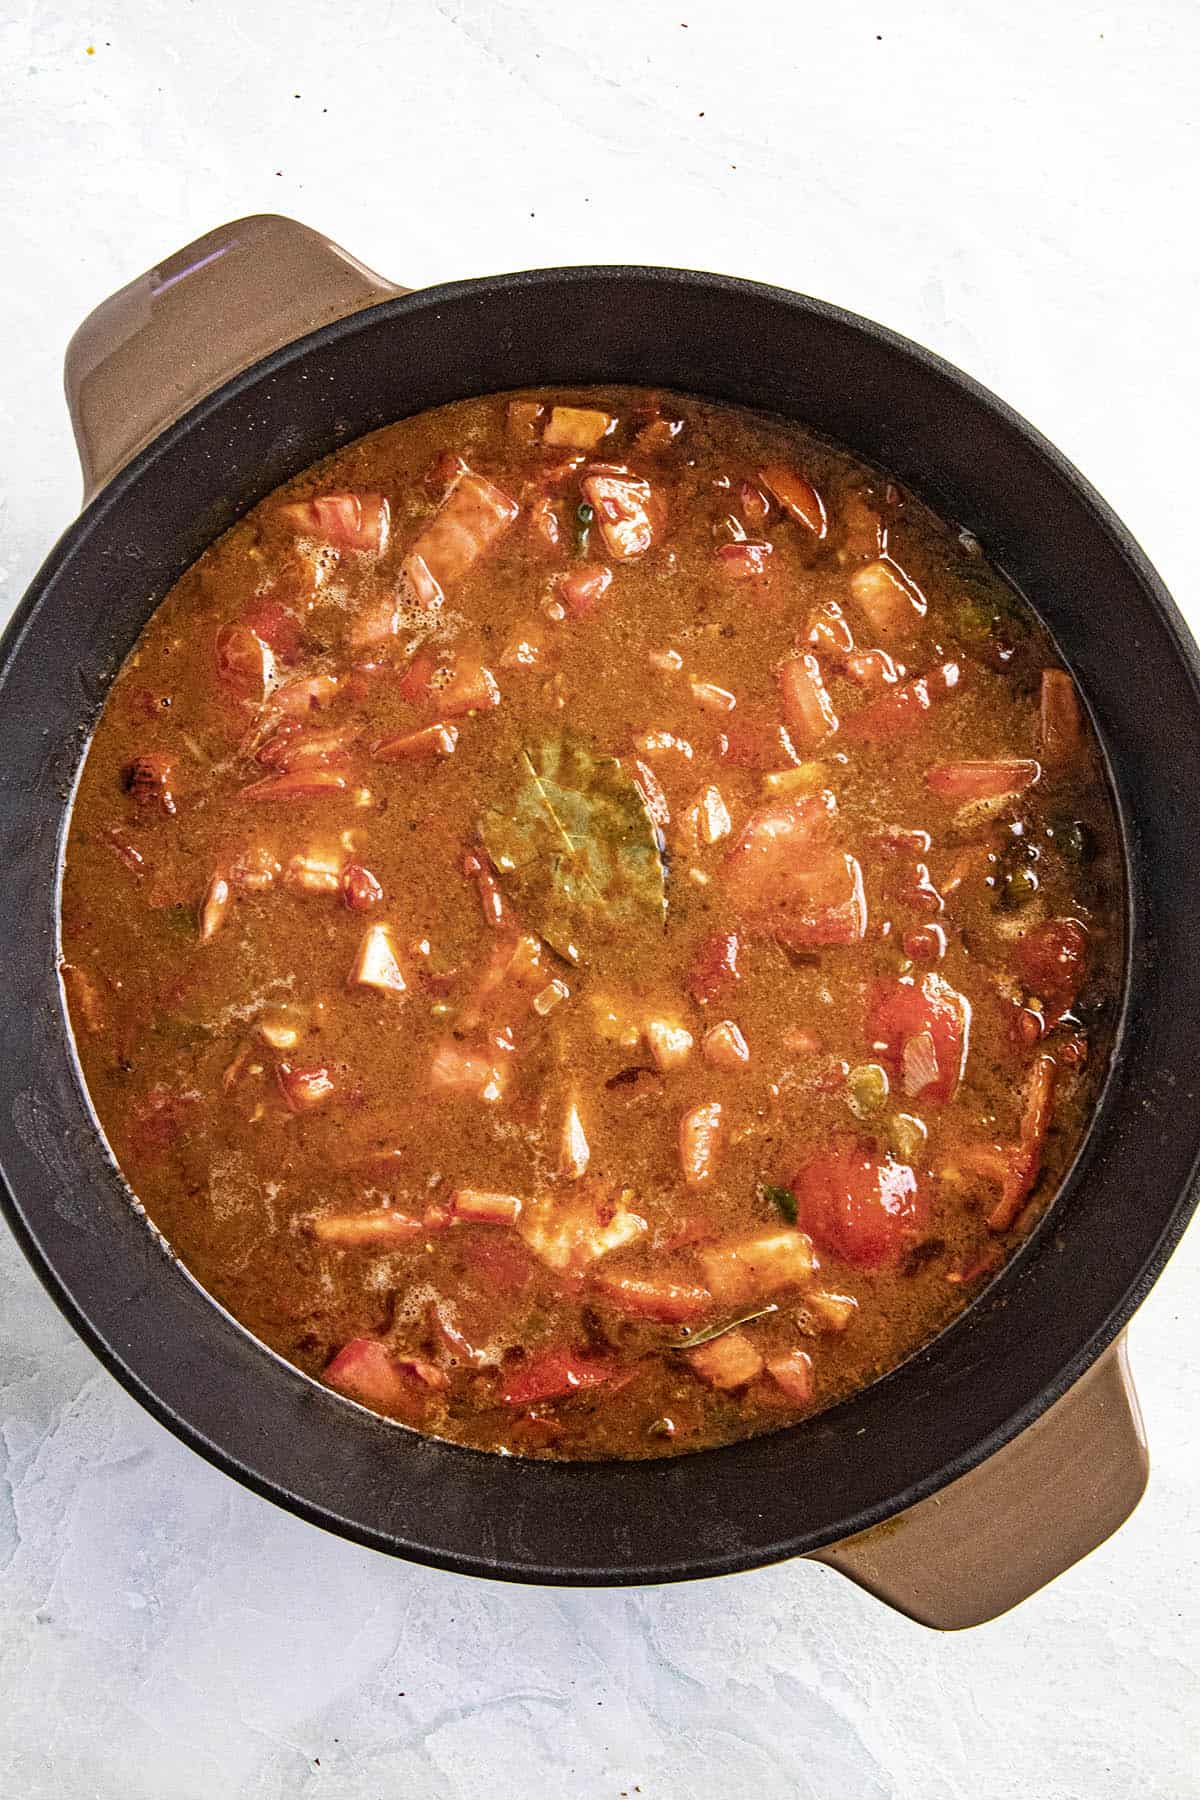 Couvillion simmering in a pot